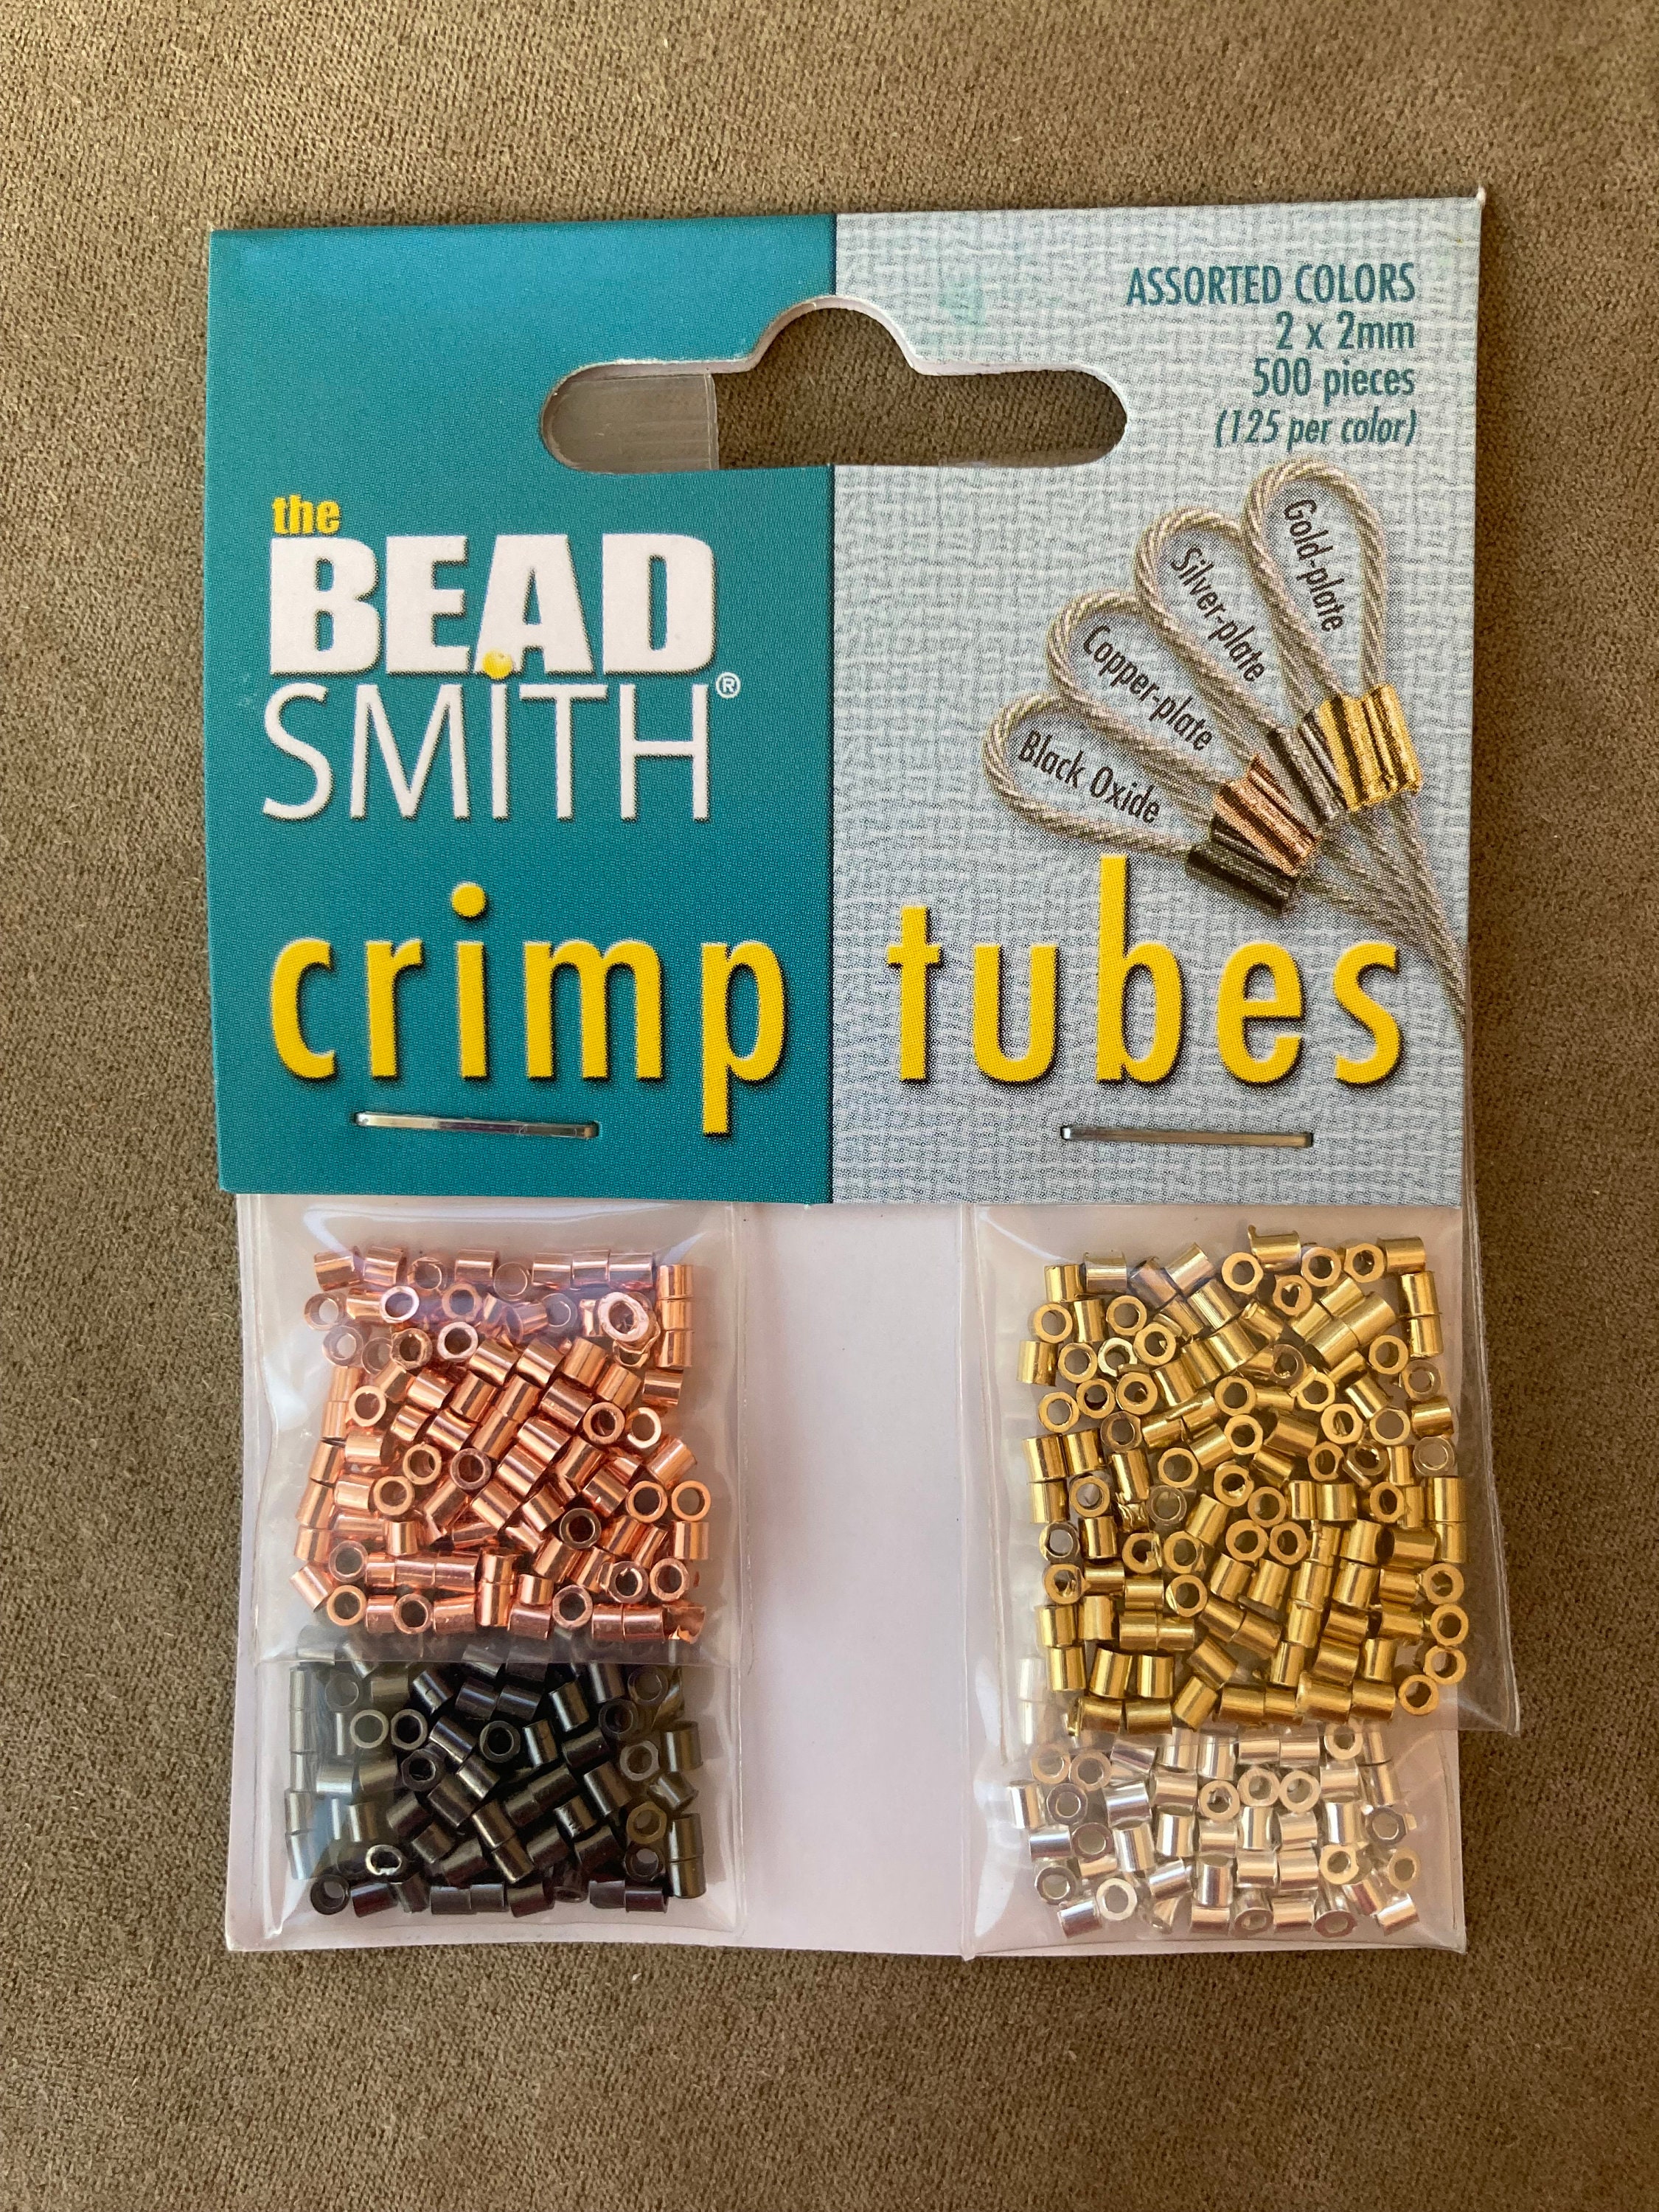 (1/2oz) Approximately 380 Gold Plated 2x1.5mm Crimp Tubes Crimping Beads